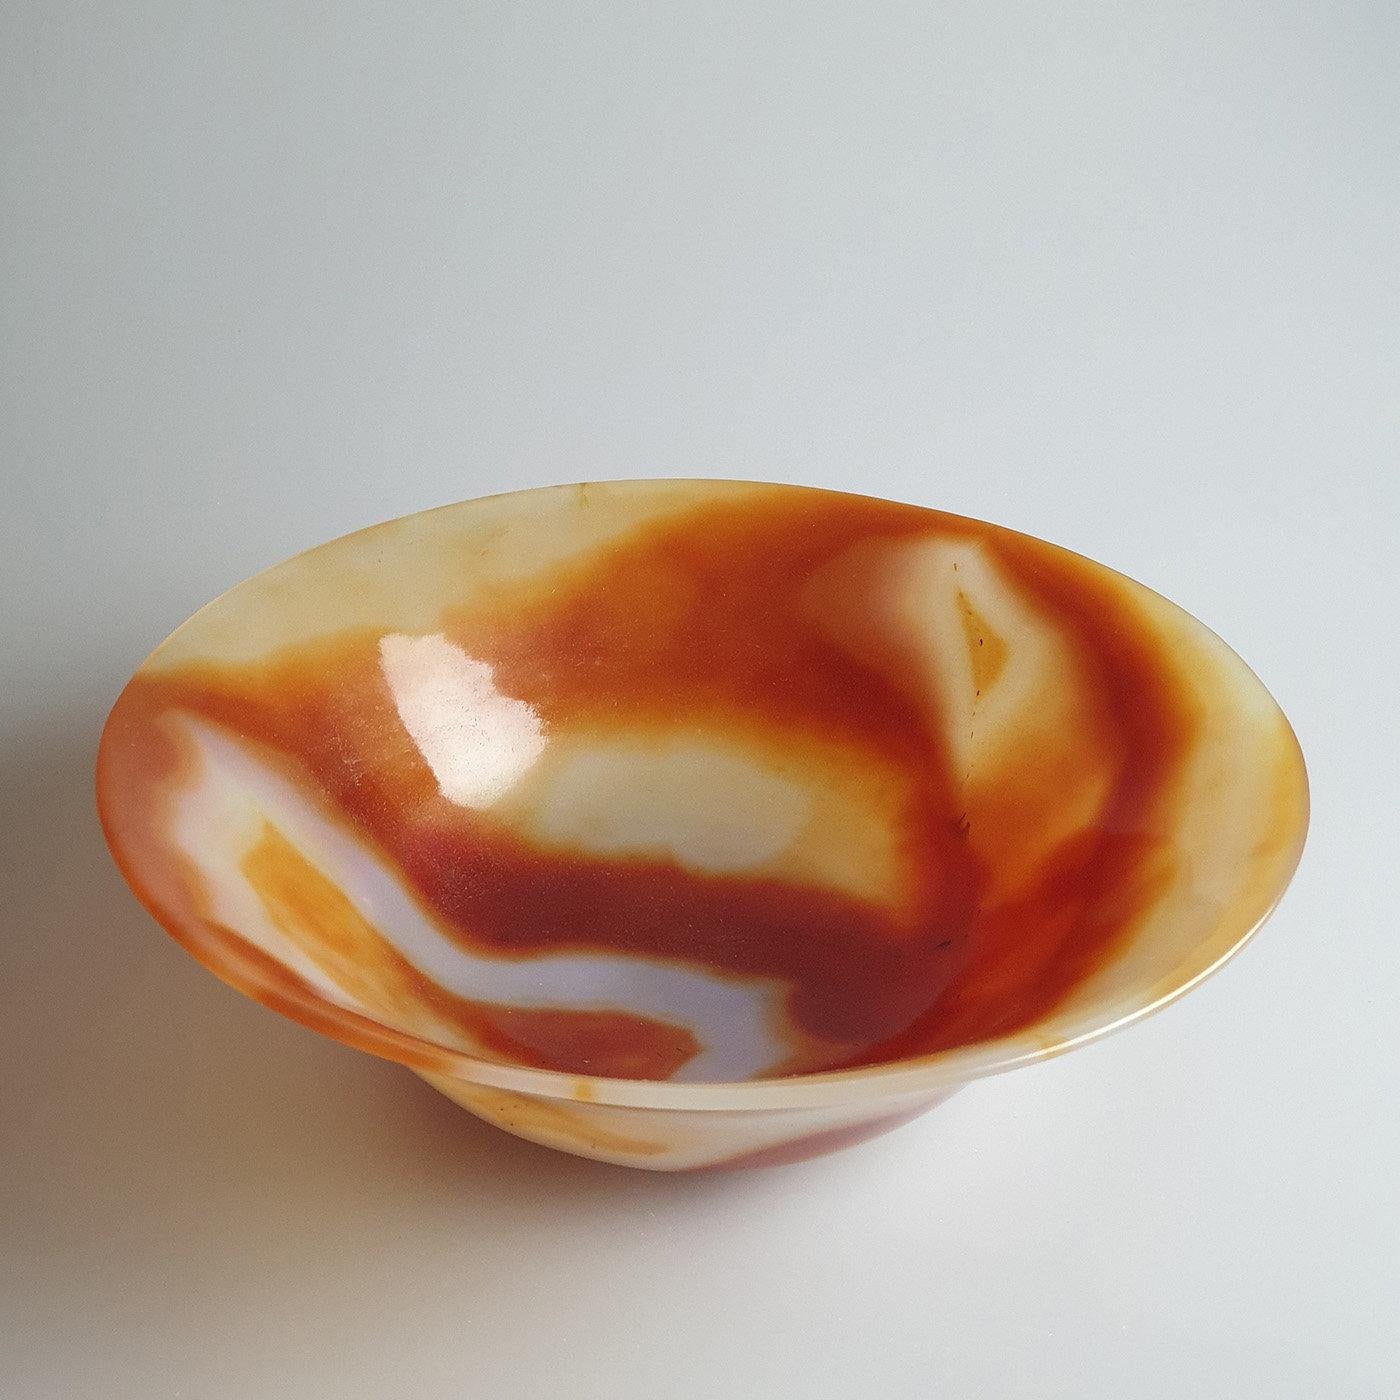 Exquisitely manufactured from a single piece of the Brazilian carnelian agate, this bowl is a one-of-a-kind object. Creating various shades of colors ranging from a dark red to blending tones of white and orange completing the bowl's rim, it